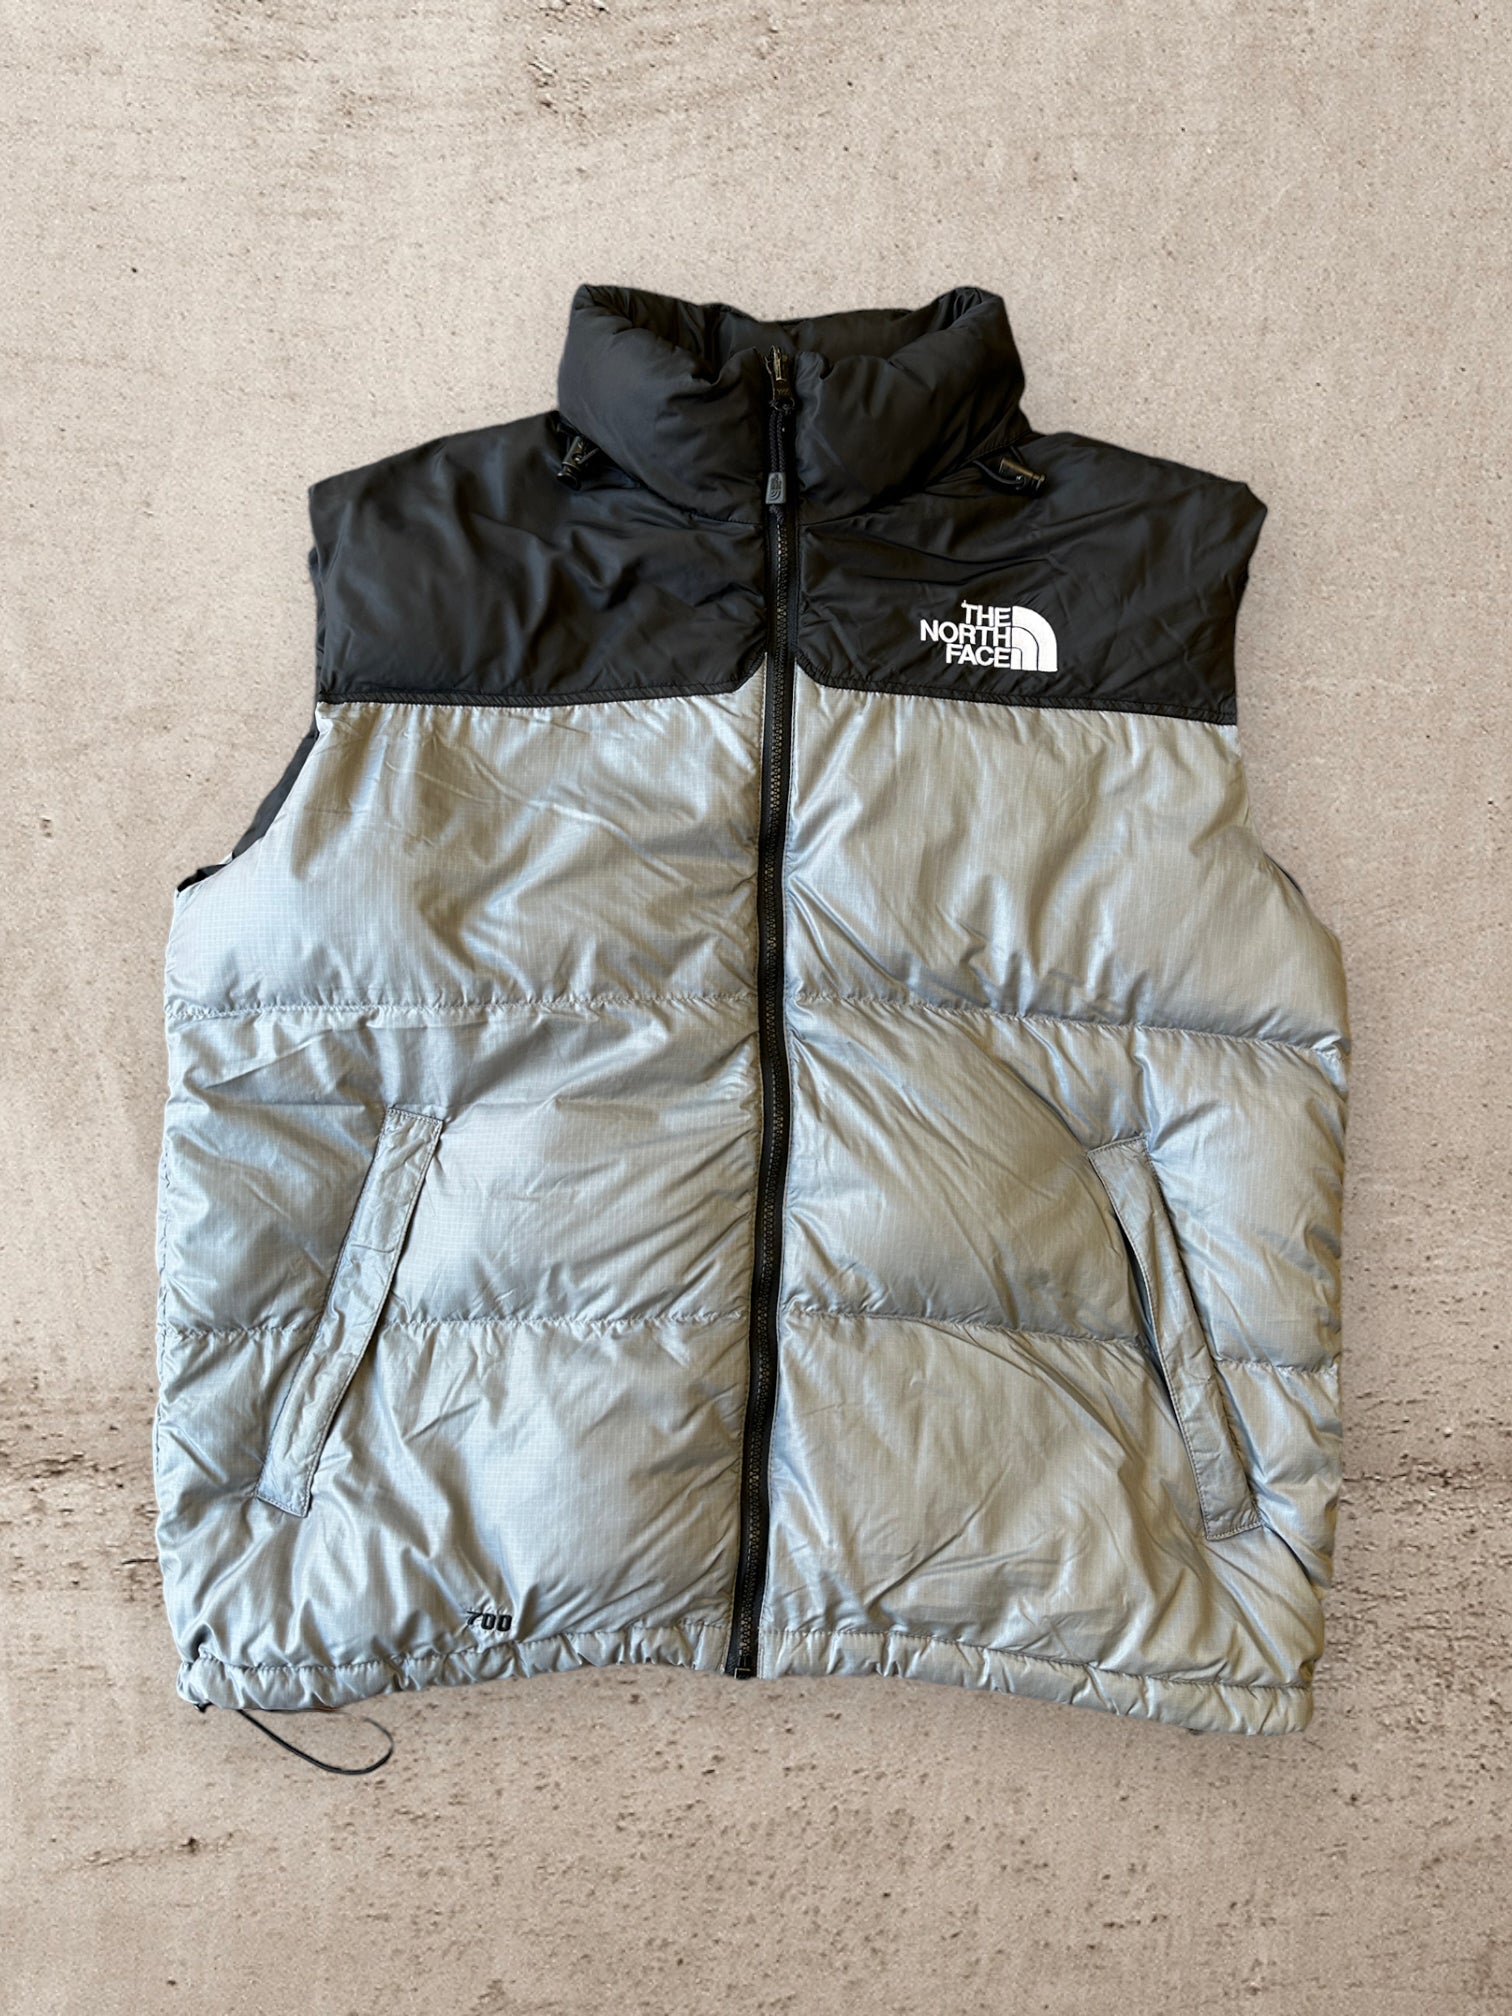 The North Face 700 Puffer Vest Silver/Grey - XL